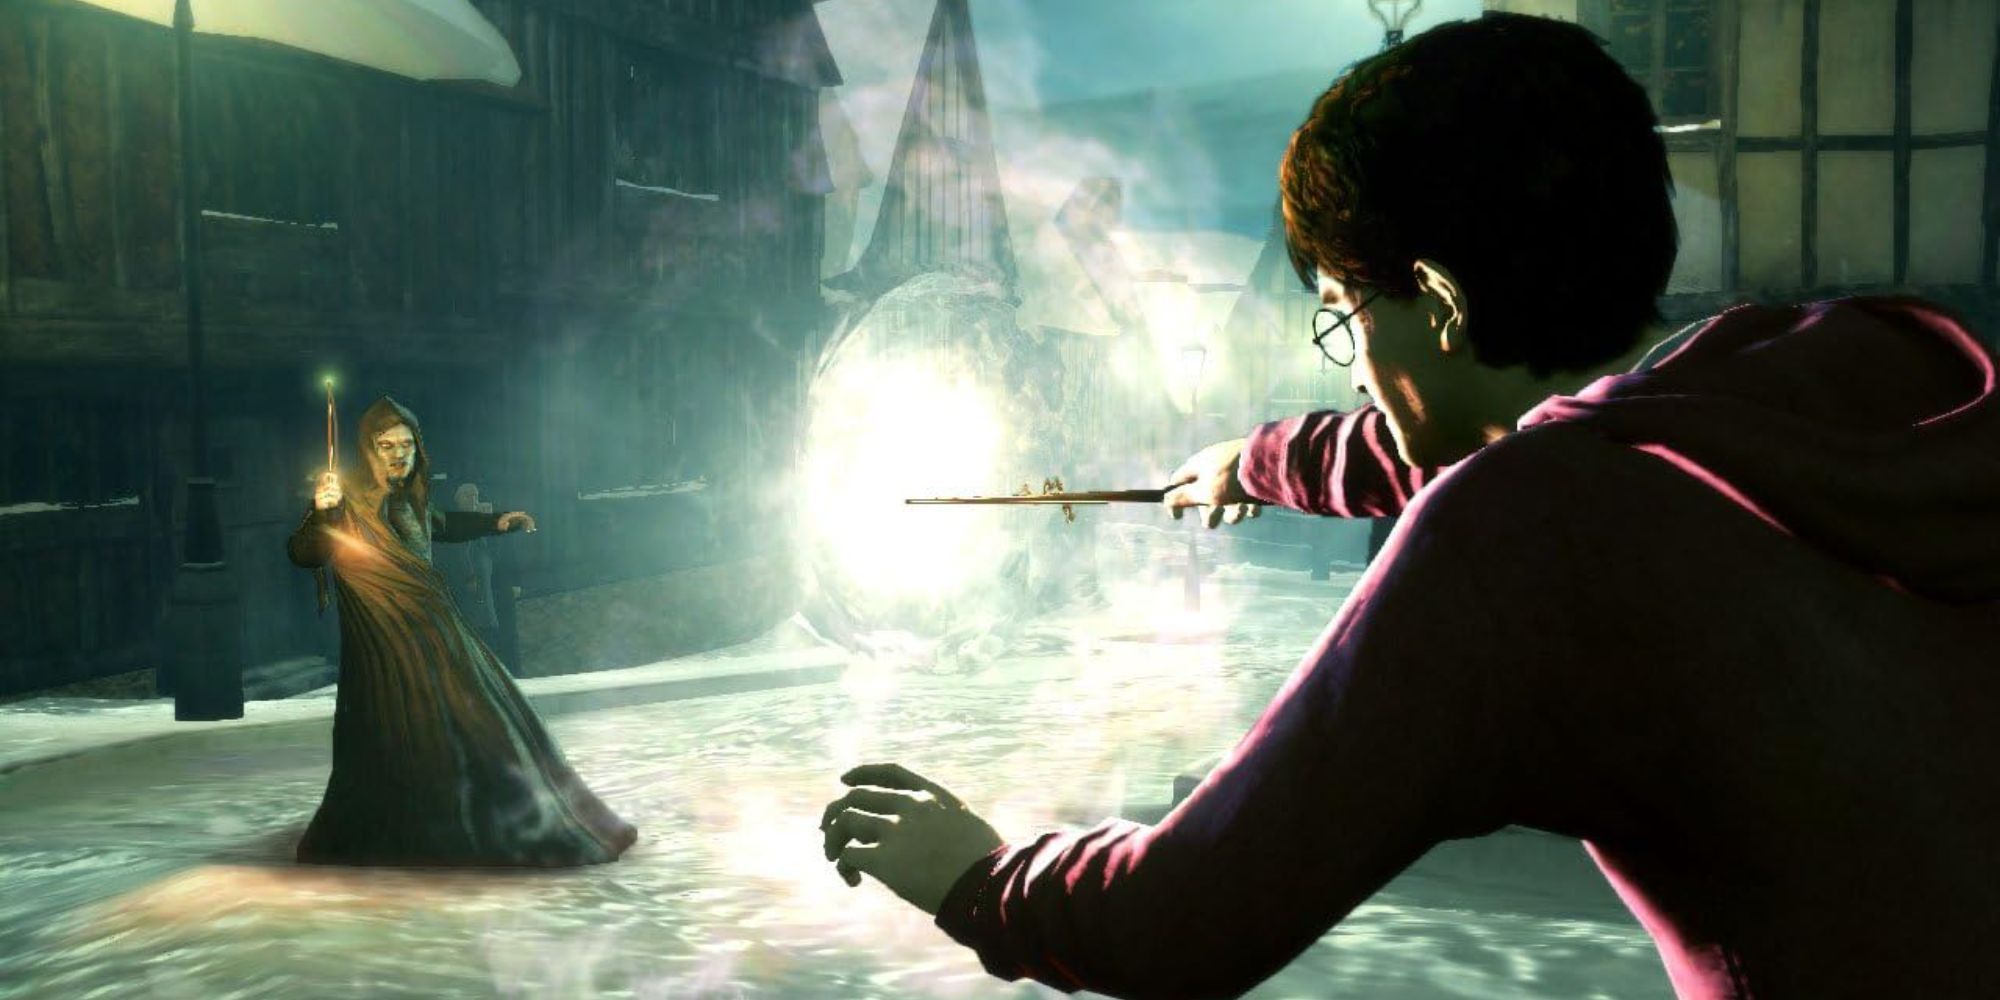 Harry Potter and the Deathly Hallows Part 1 Video Game, Harry duelling with a Death Eater